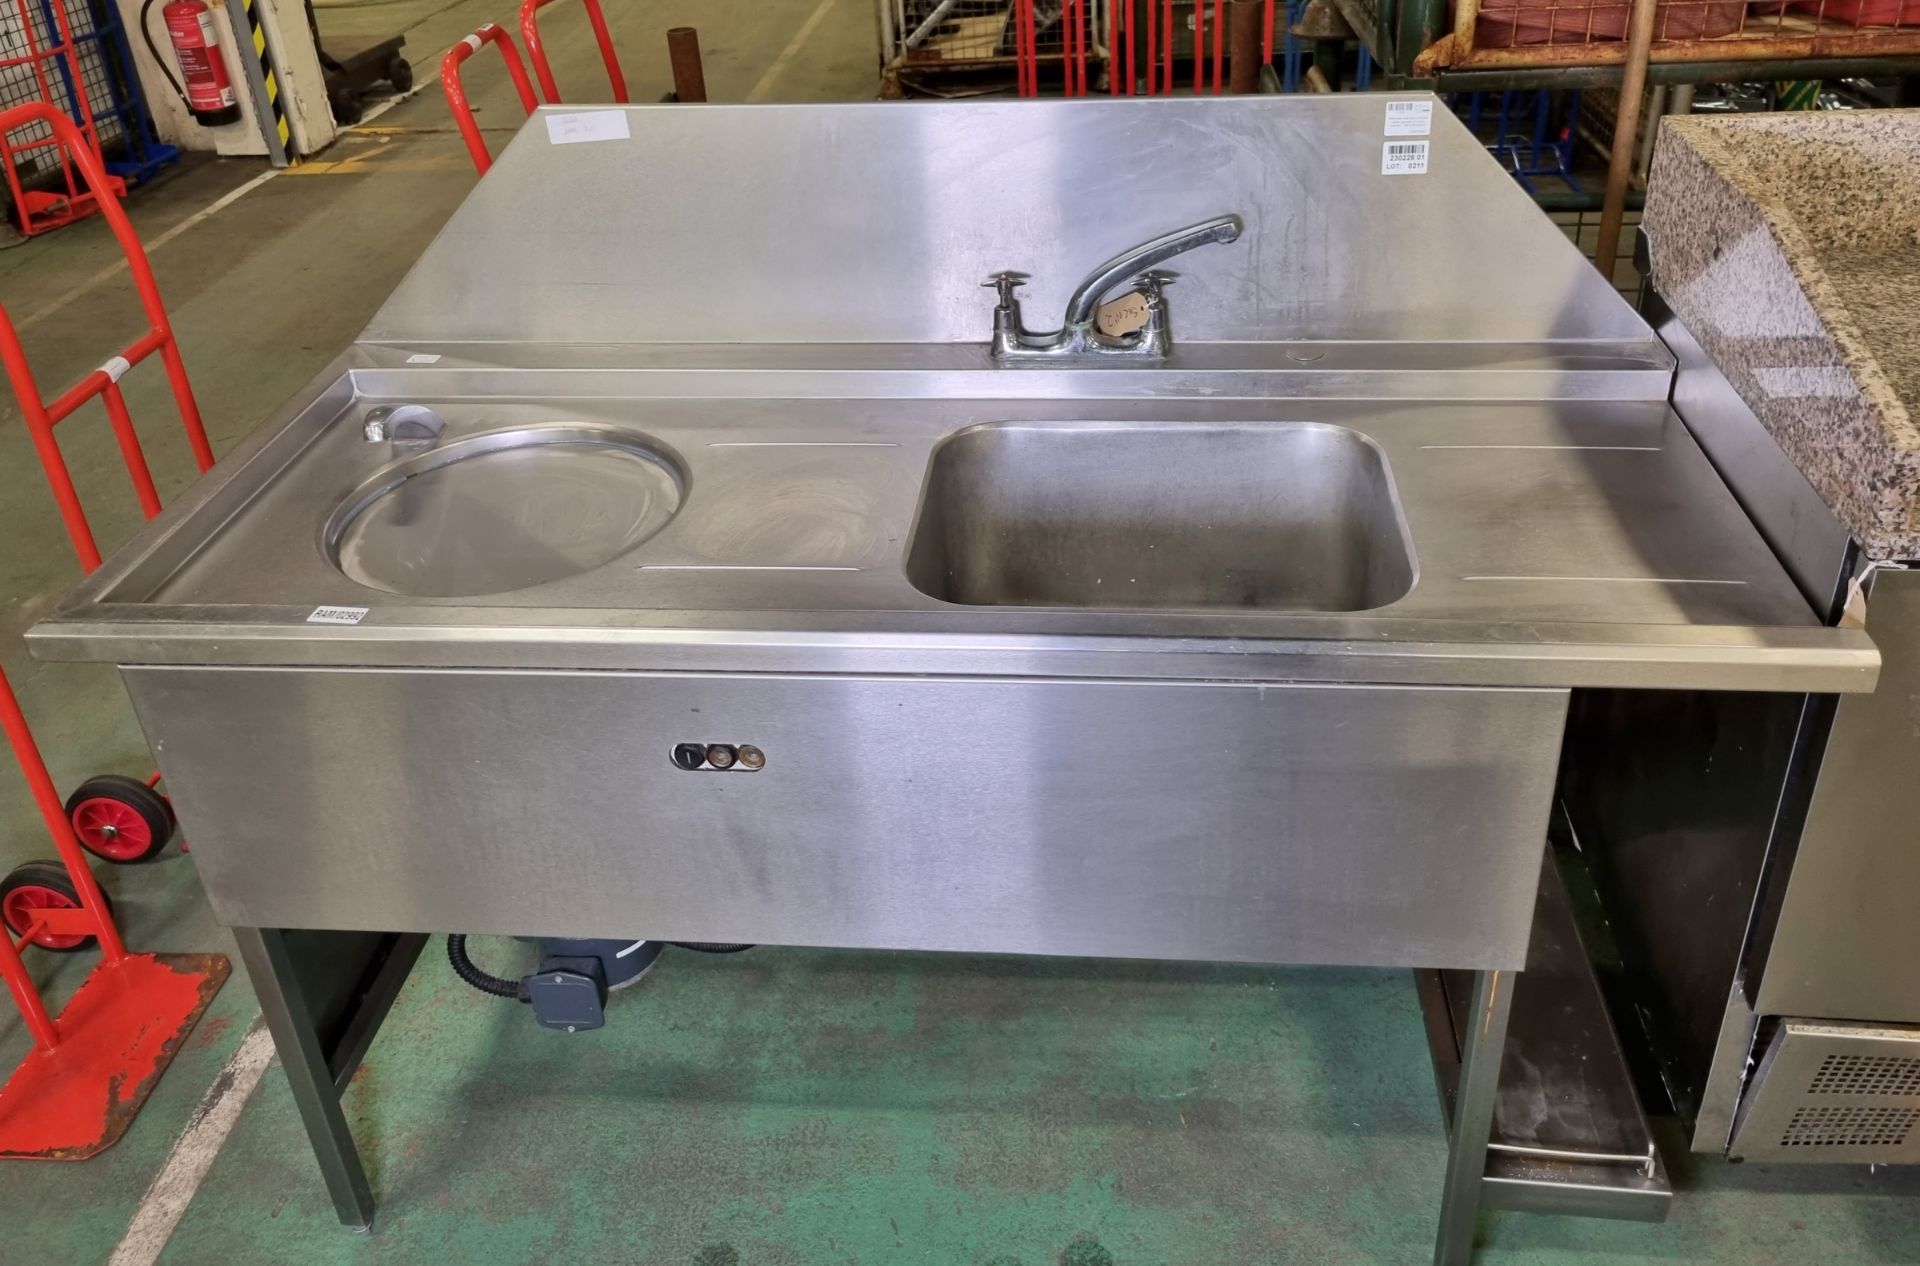 Stainless steel sink unit with waste disposal (currently sealed) - 165 x 70 x 120cm - Bild 2 aus 9